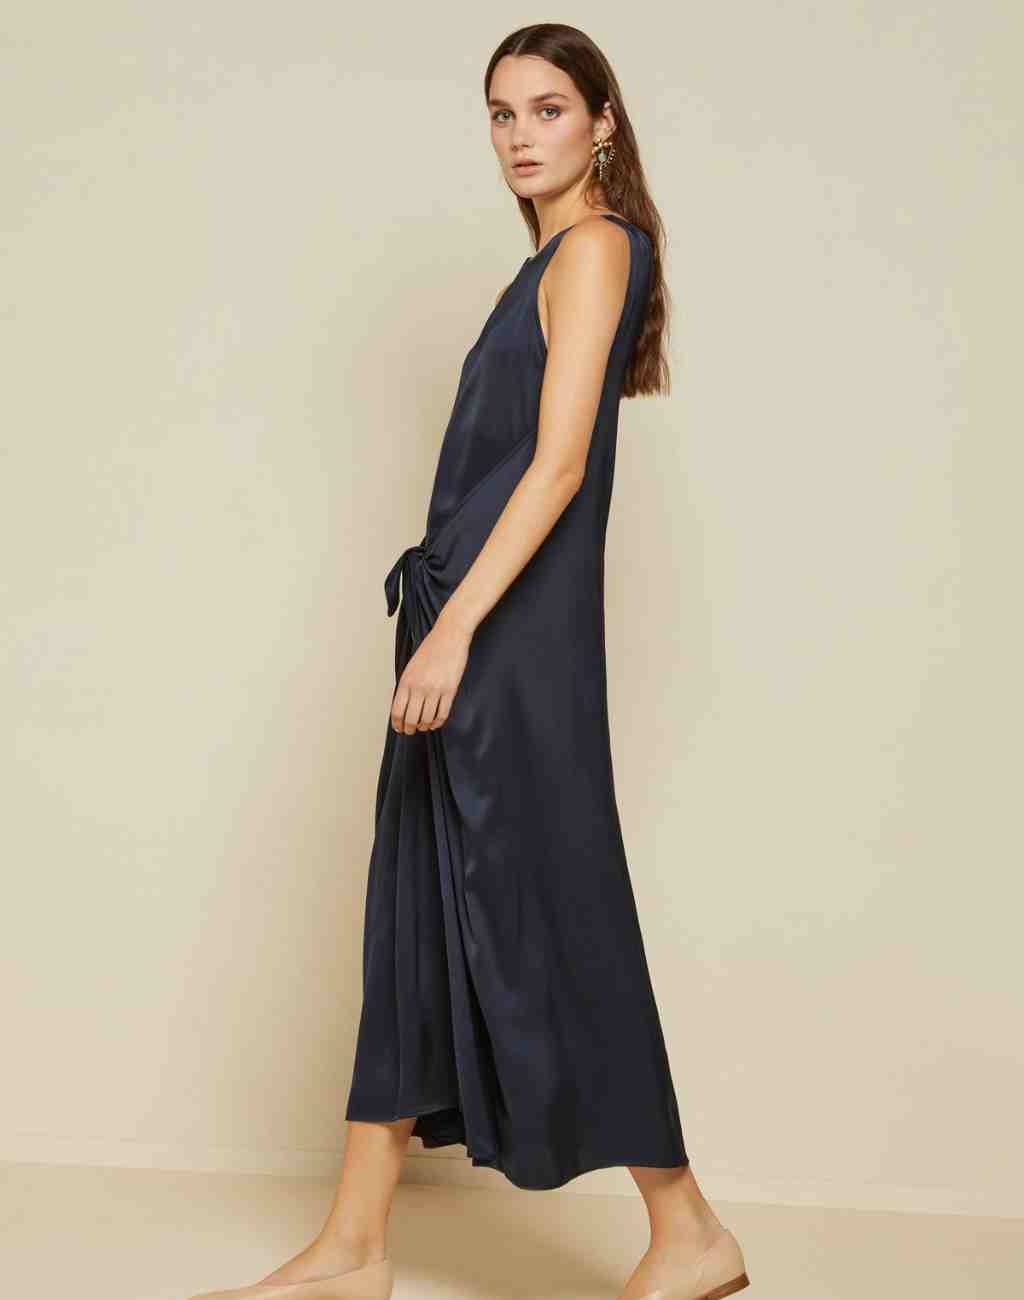 Deep Navy Sophisticated Sleeveless Maxi Dress with Flattering Front Tie